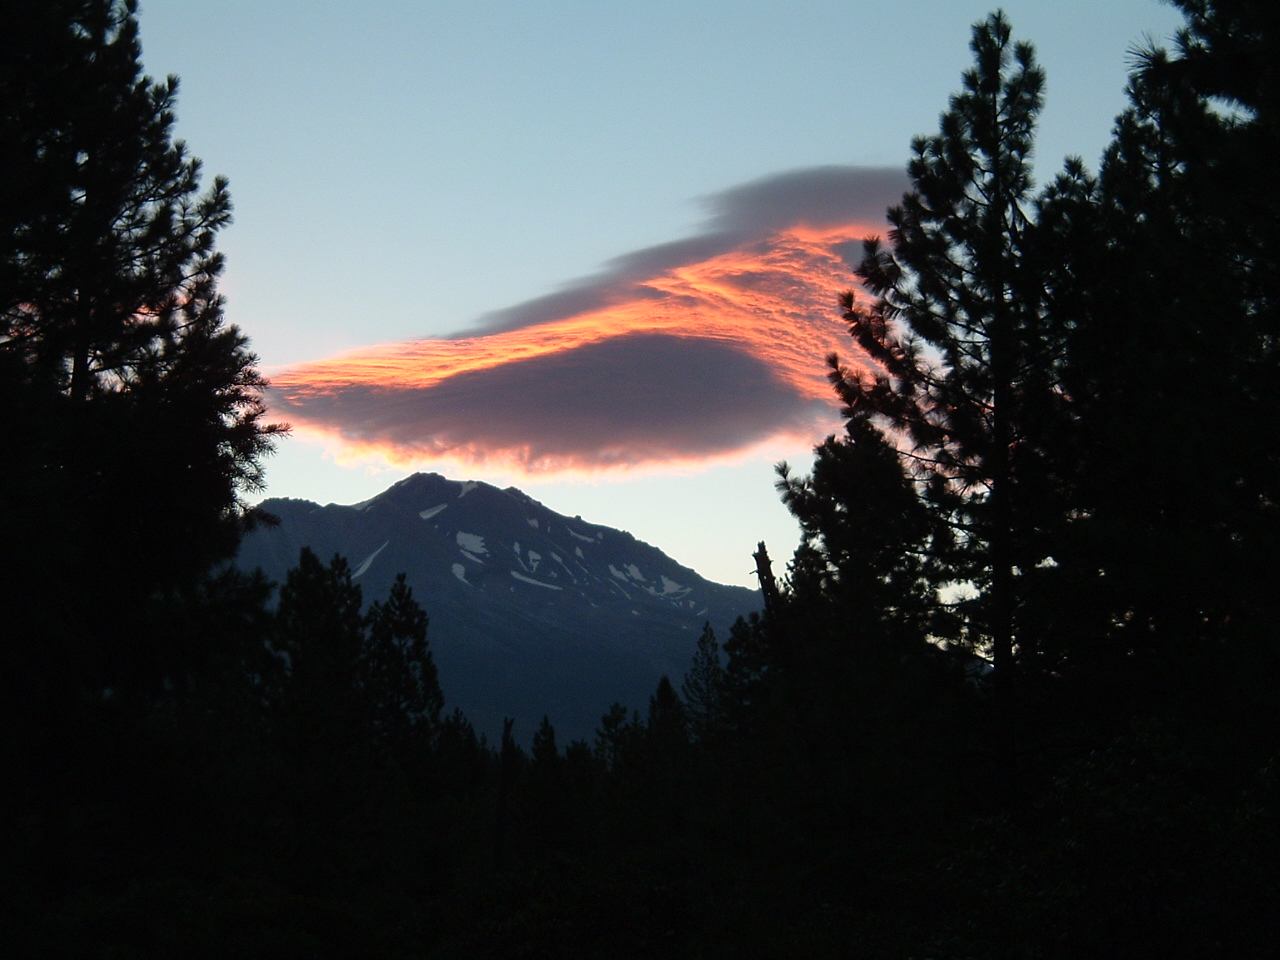 View from Shasta Shaman land of Mt. Shasta with a lenticular cloud at sunrise 